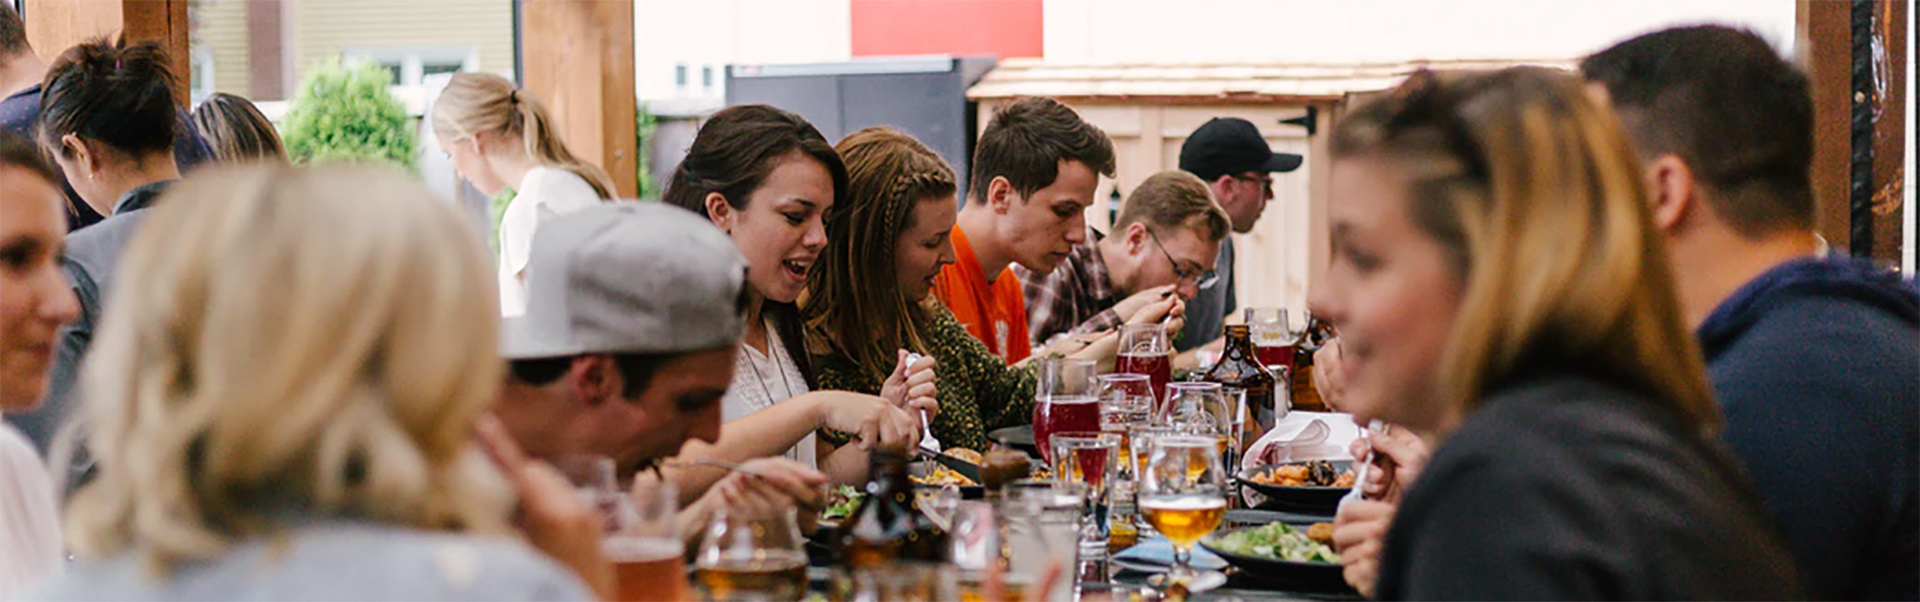 People eating at an event